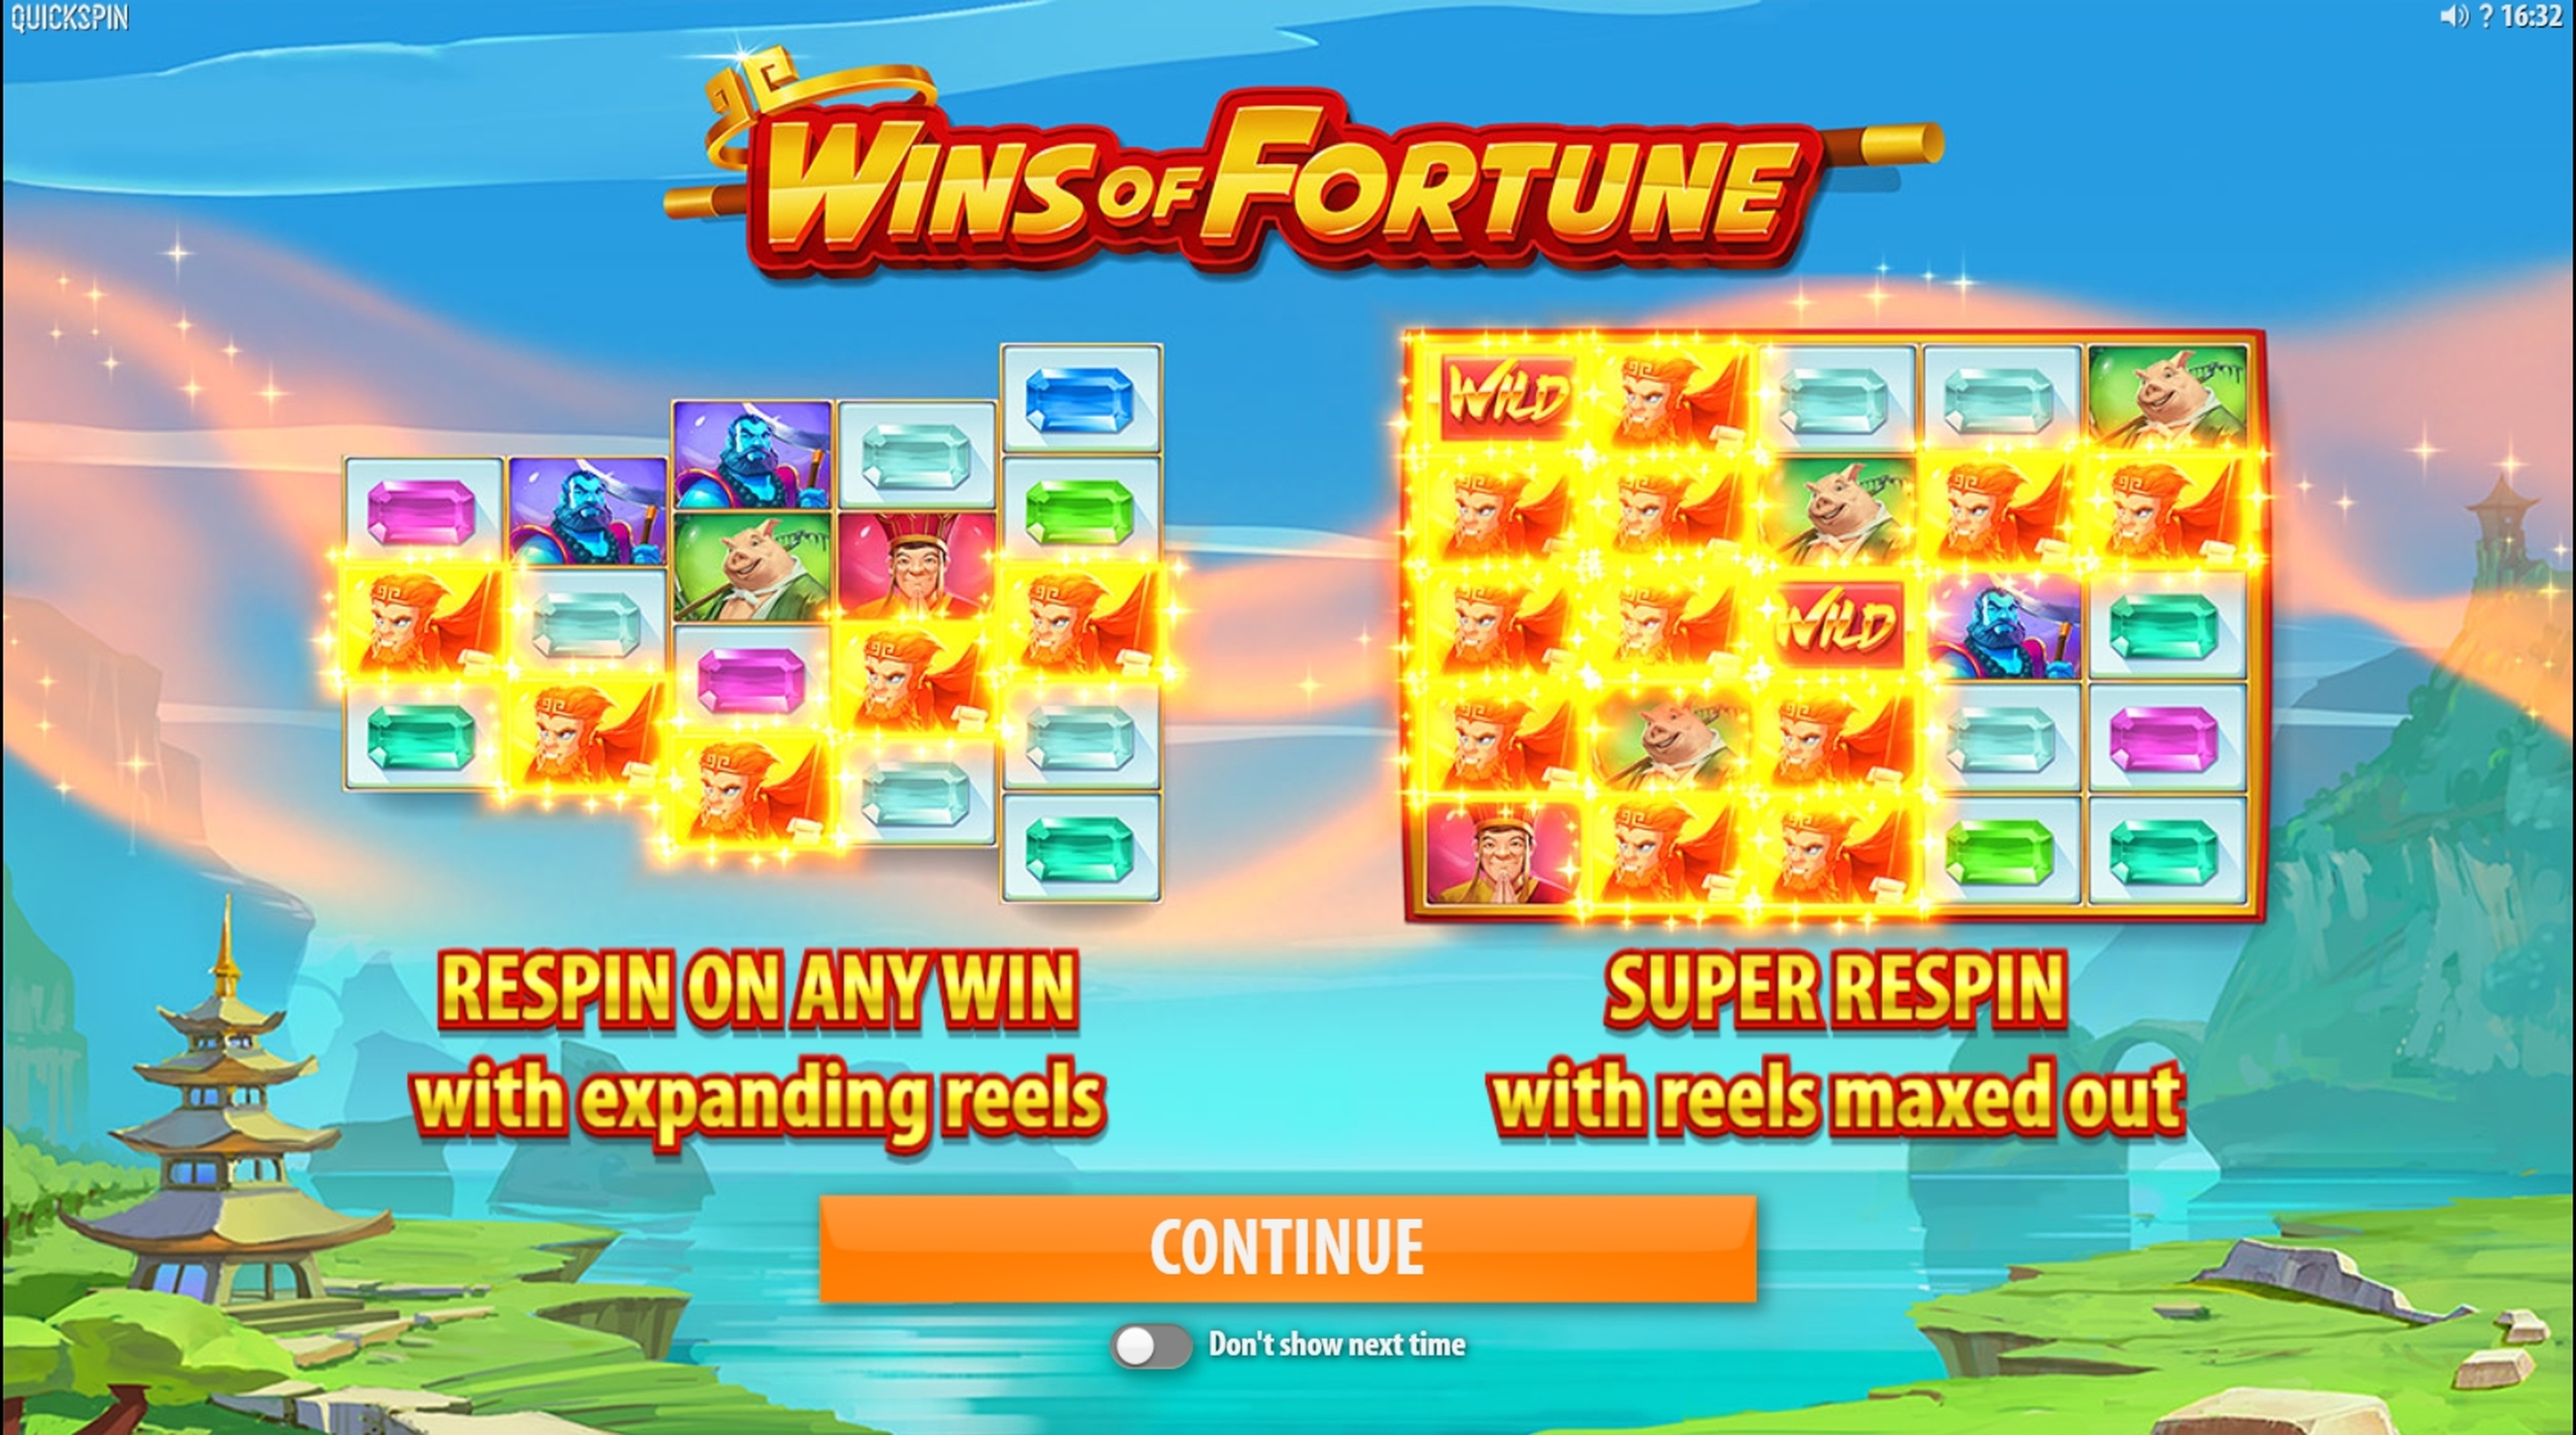 Play Wins of Fortune Free Casino Slot Game by Quickspin